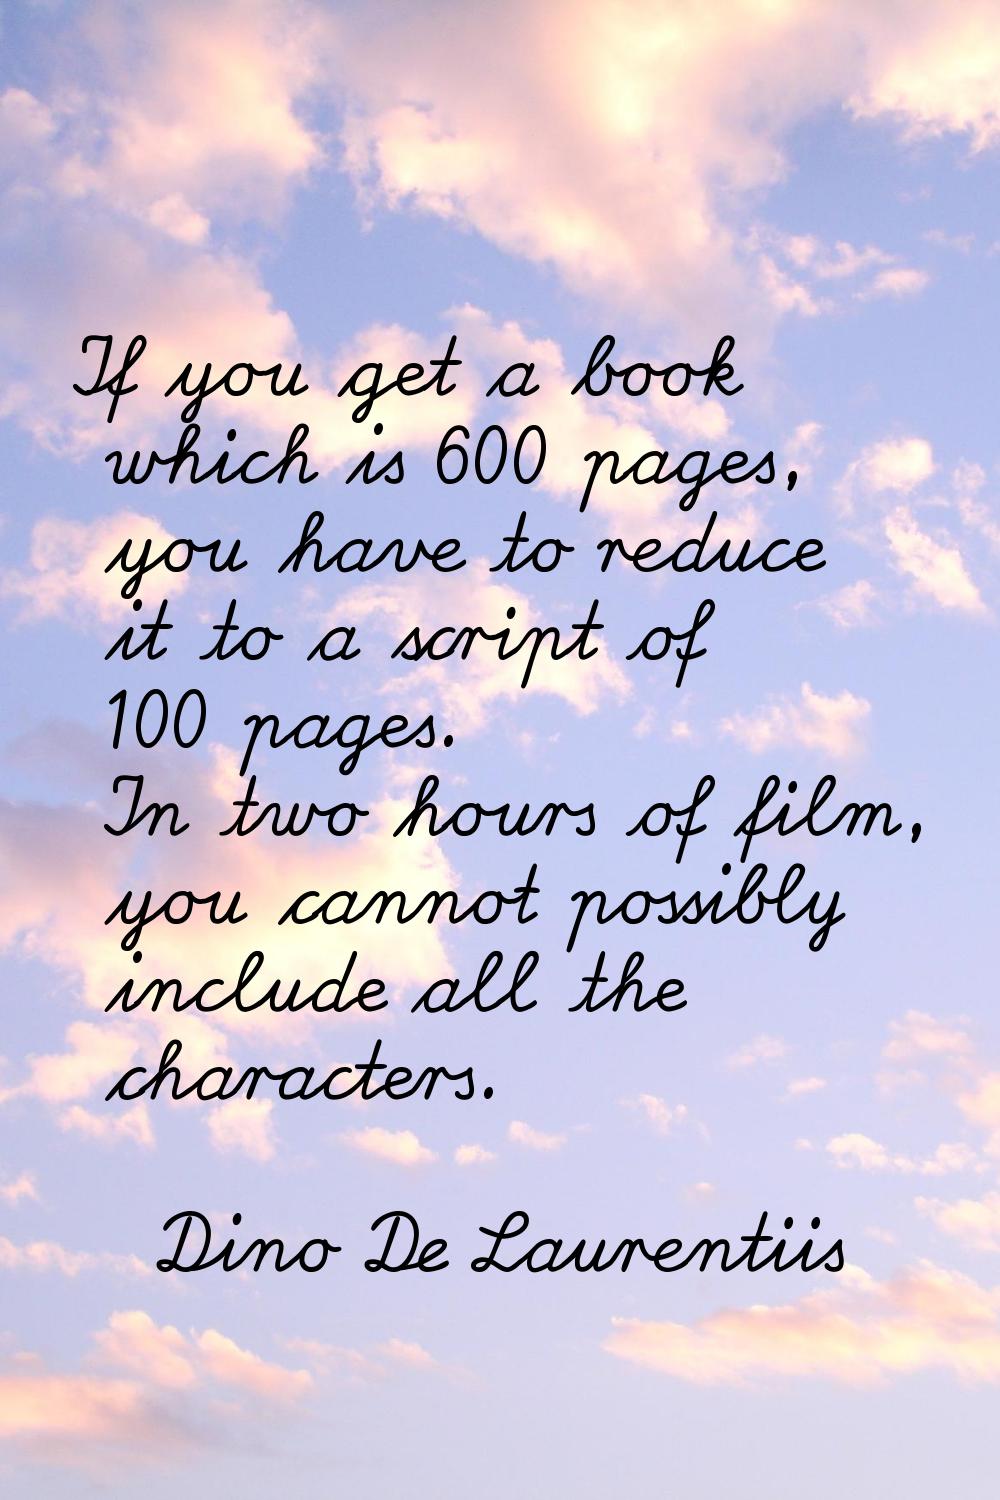 If you get a book which is 600 pages, you have to reduce it to a script of 100 pages. In two hours 